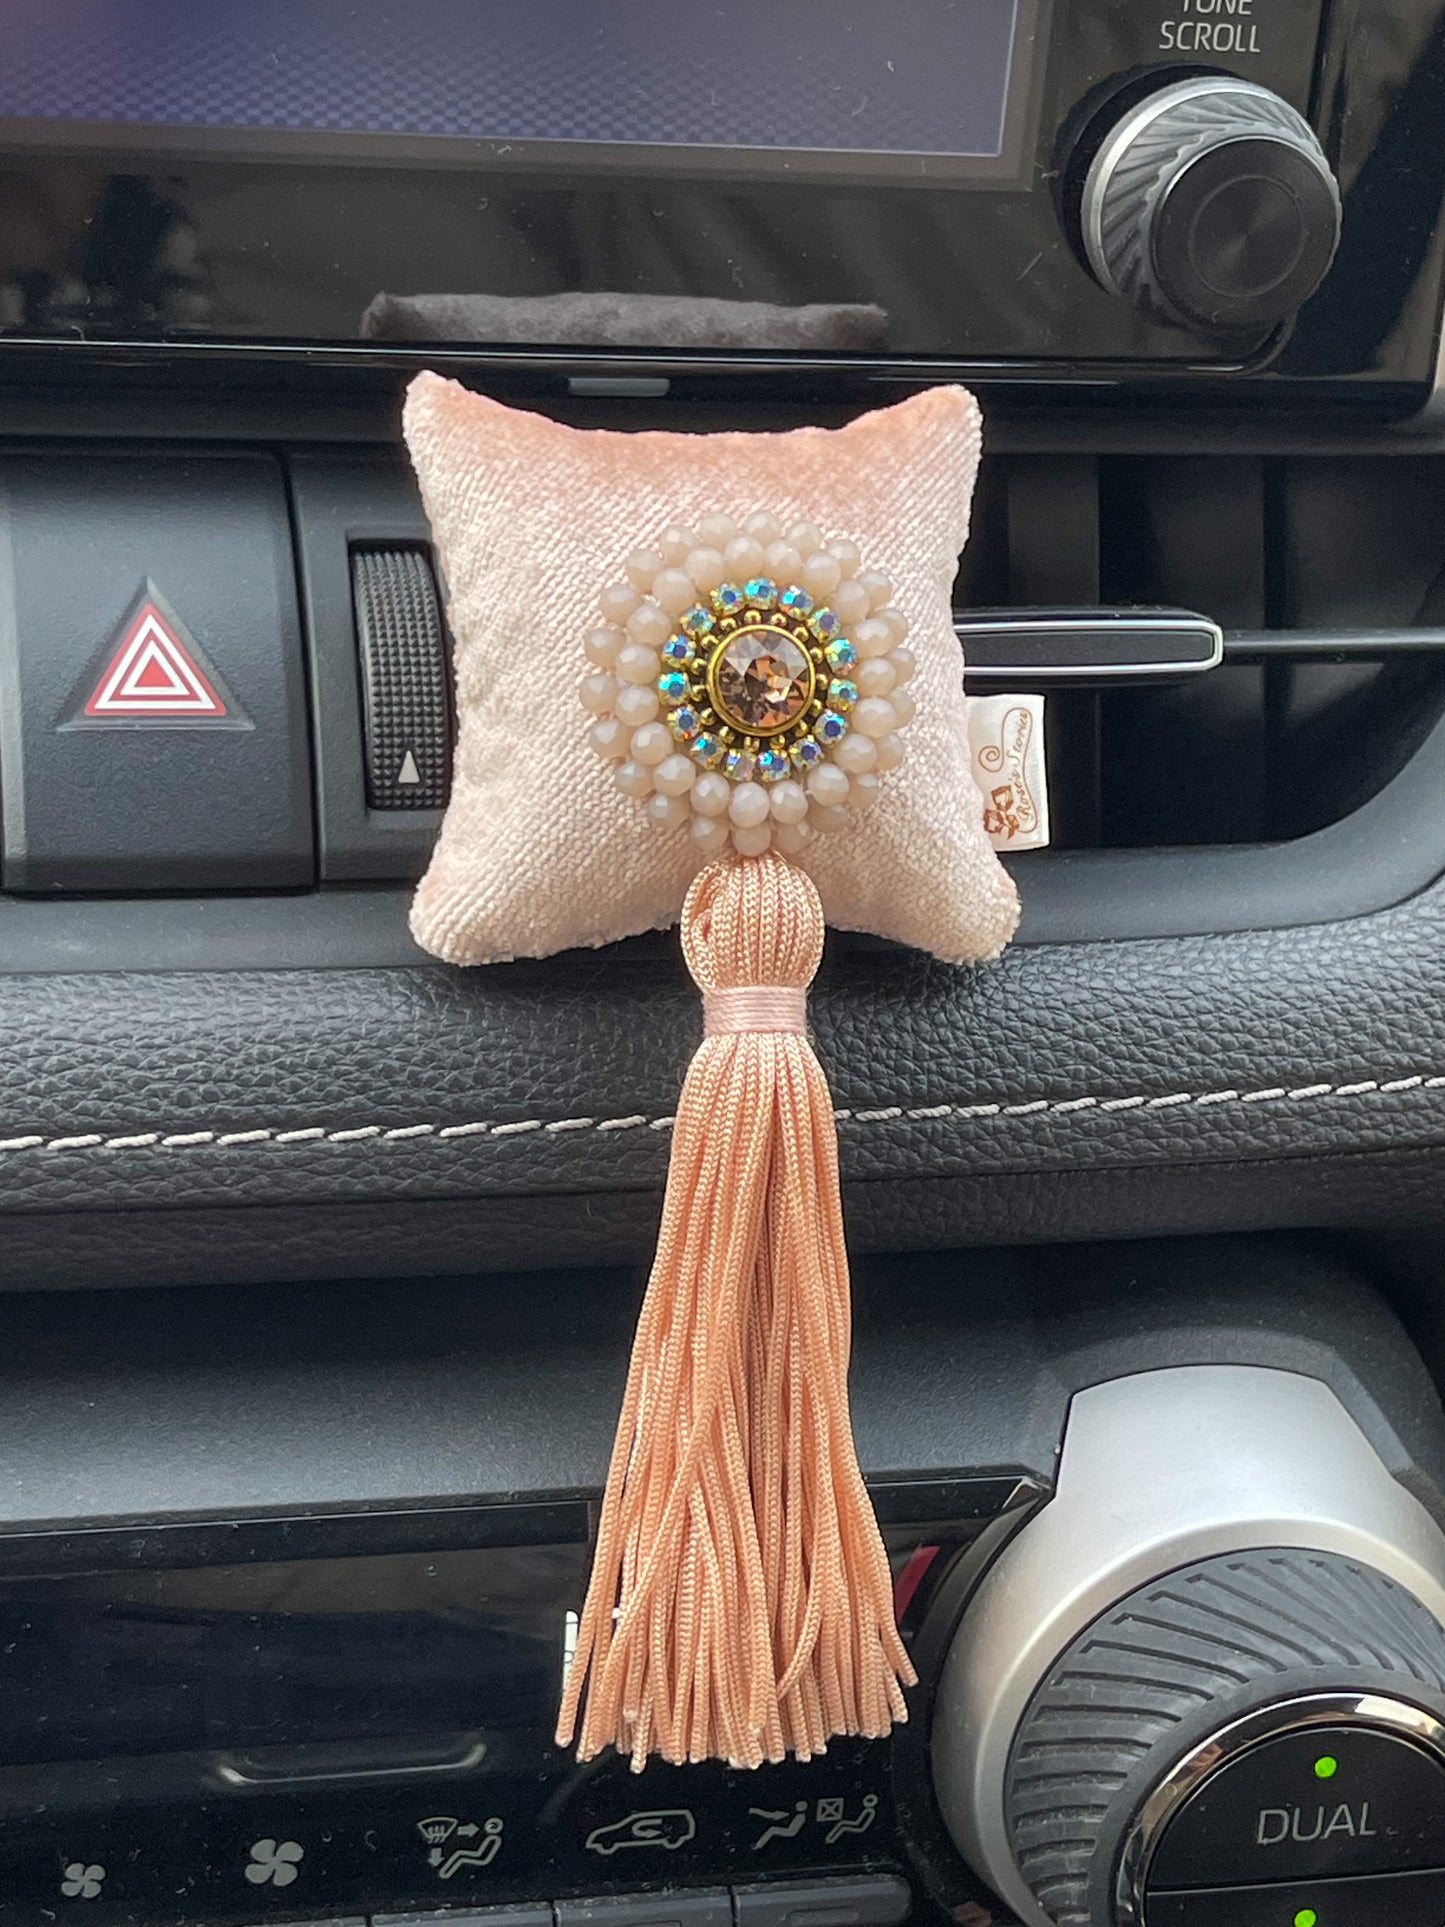 Car fragrance with sparkling crystals